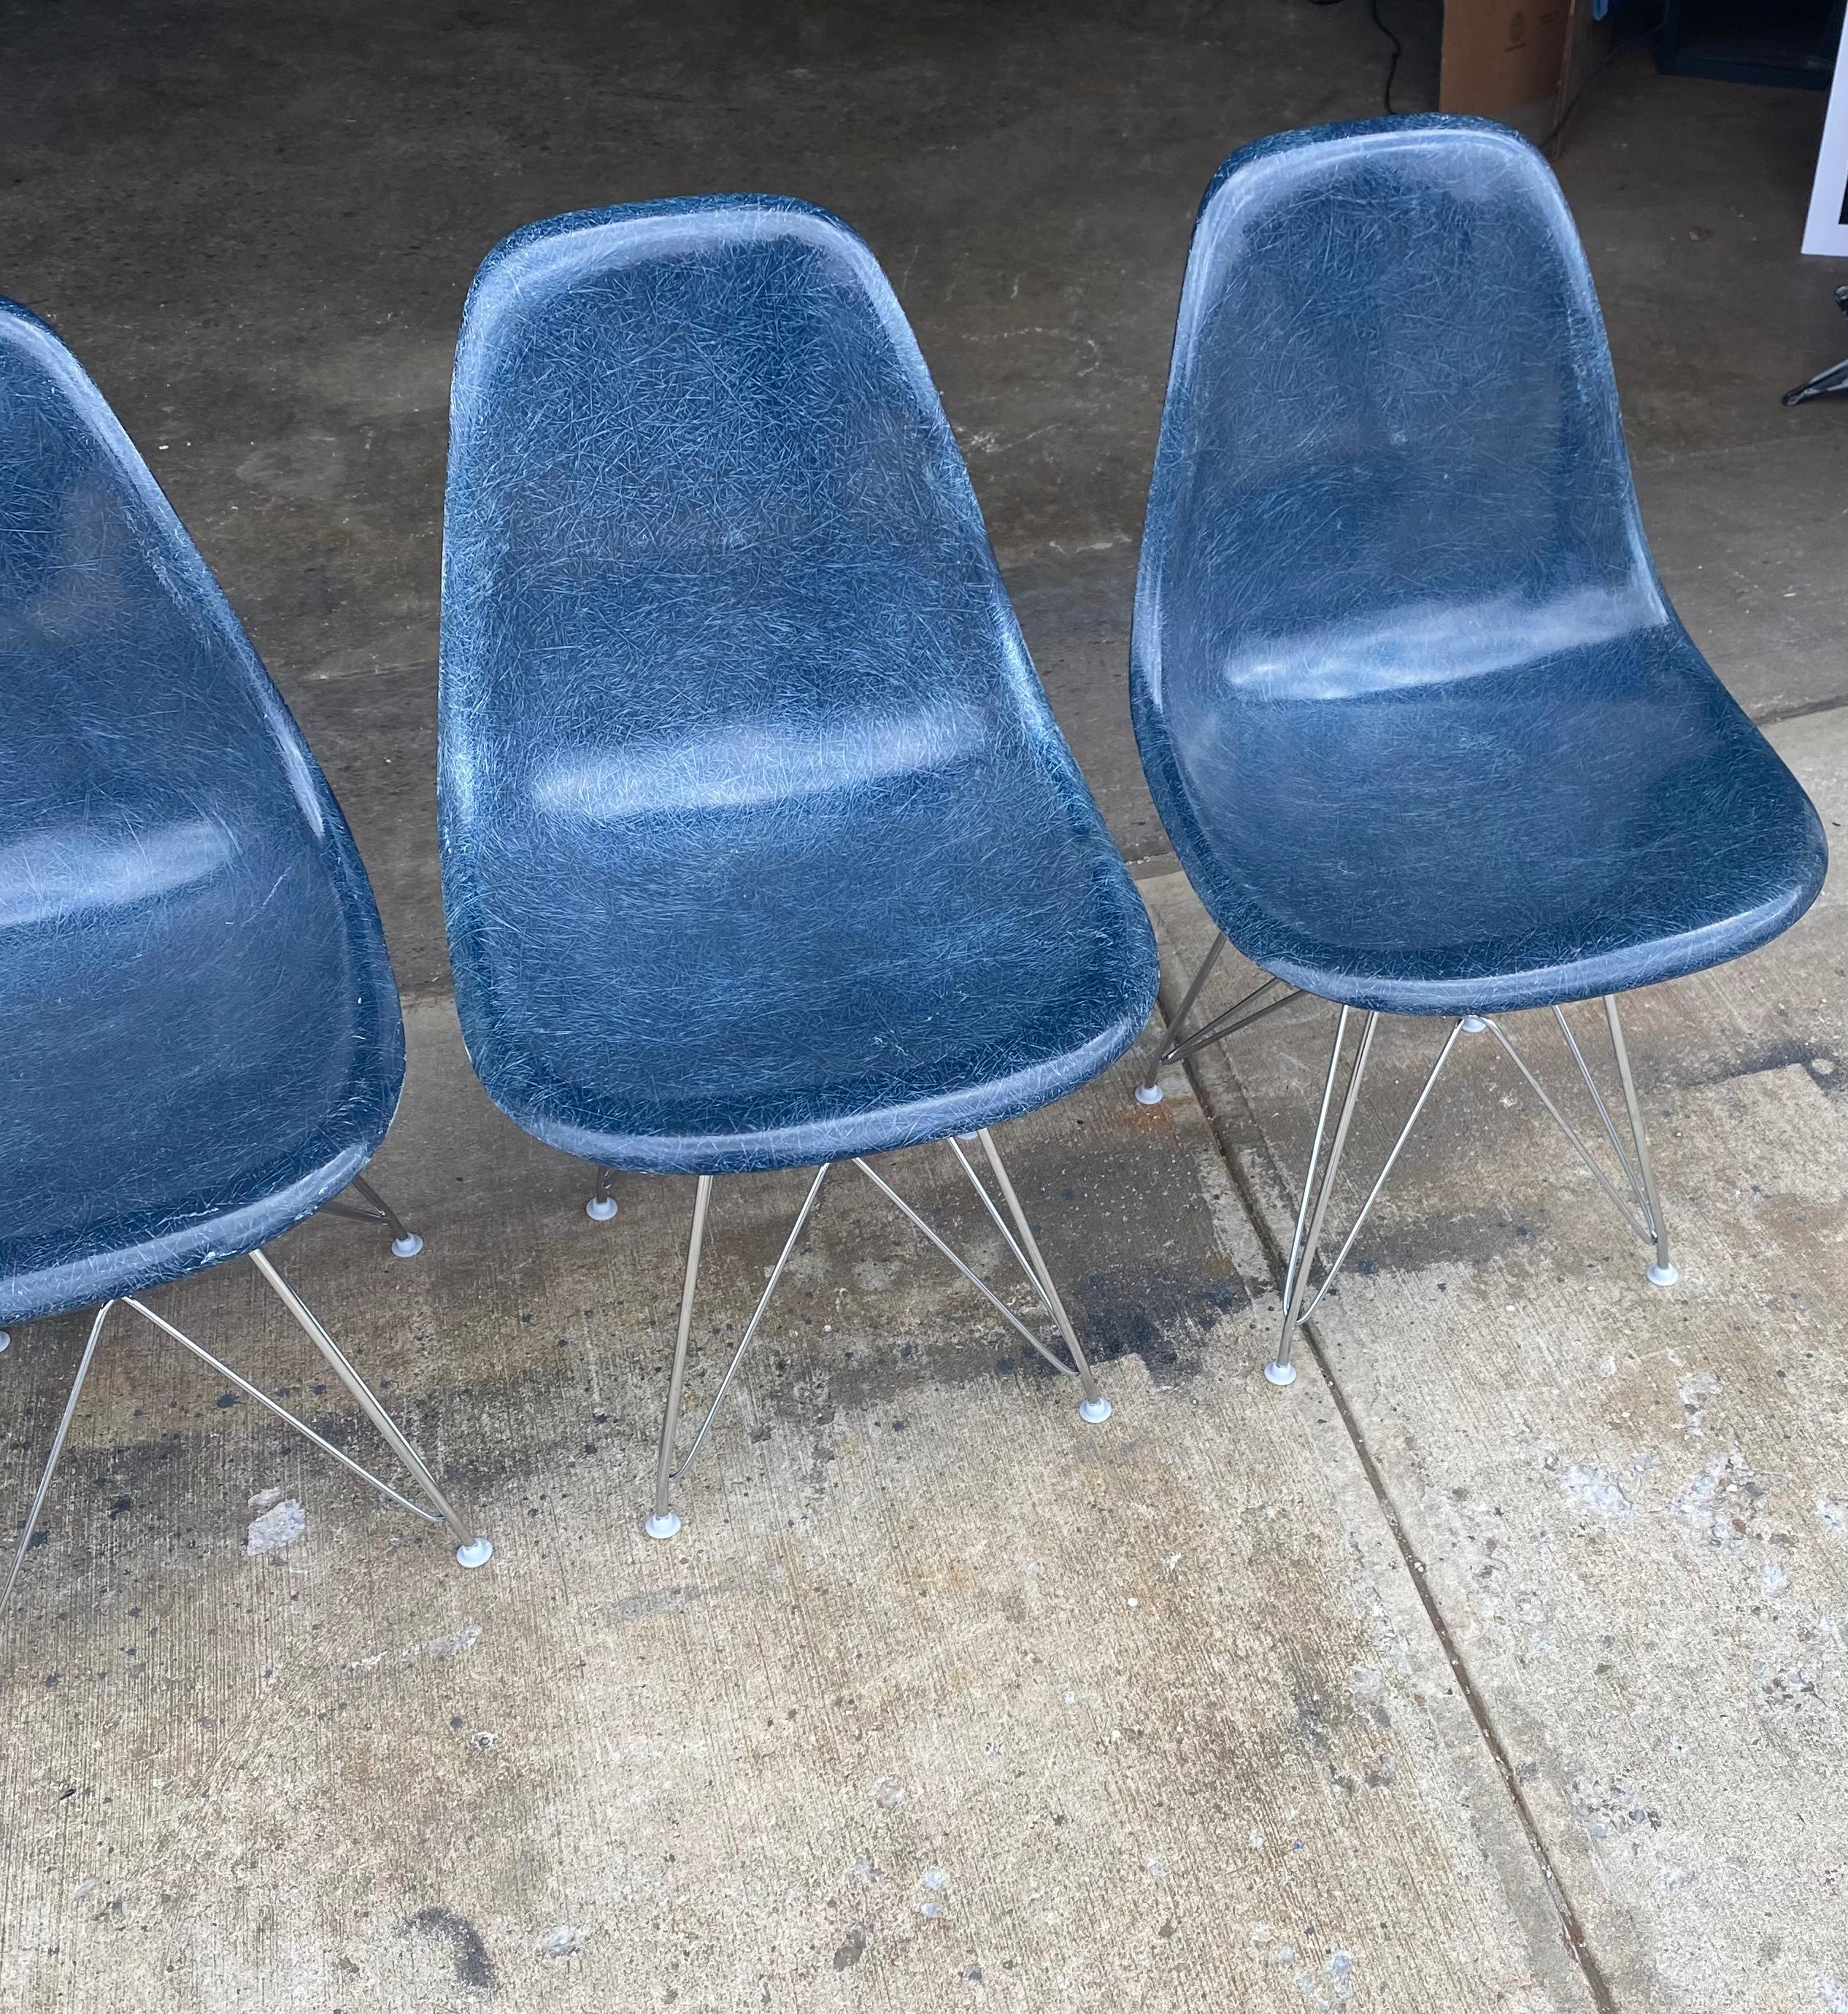 20th Century Herman Miller Eames Fiberglass DSR Dining Chairs in Navy Blue